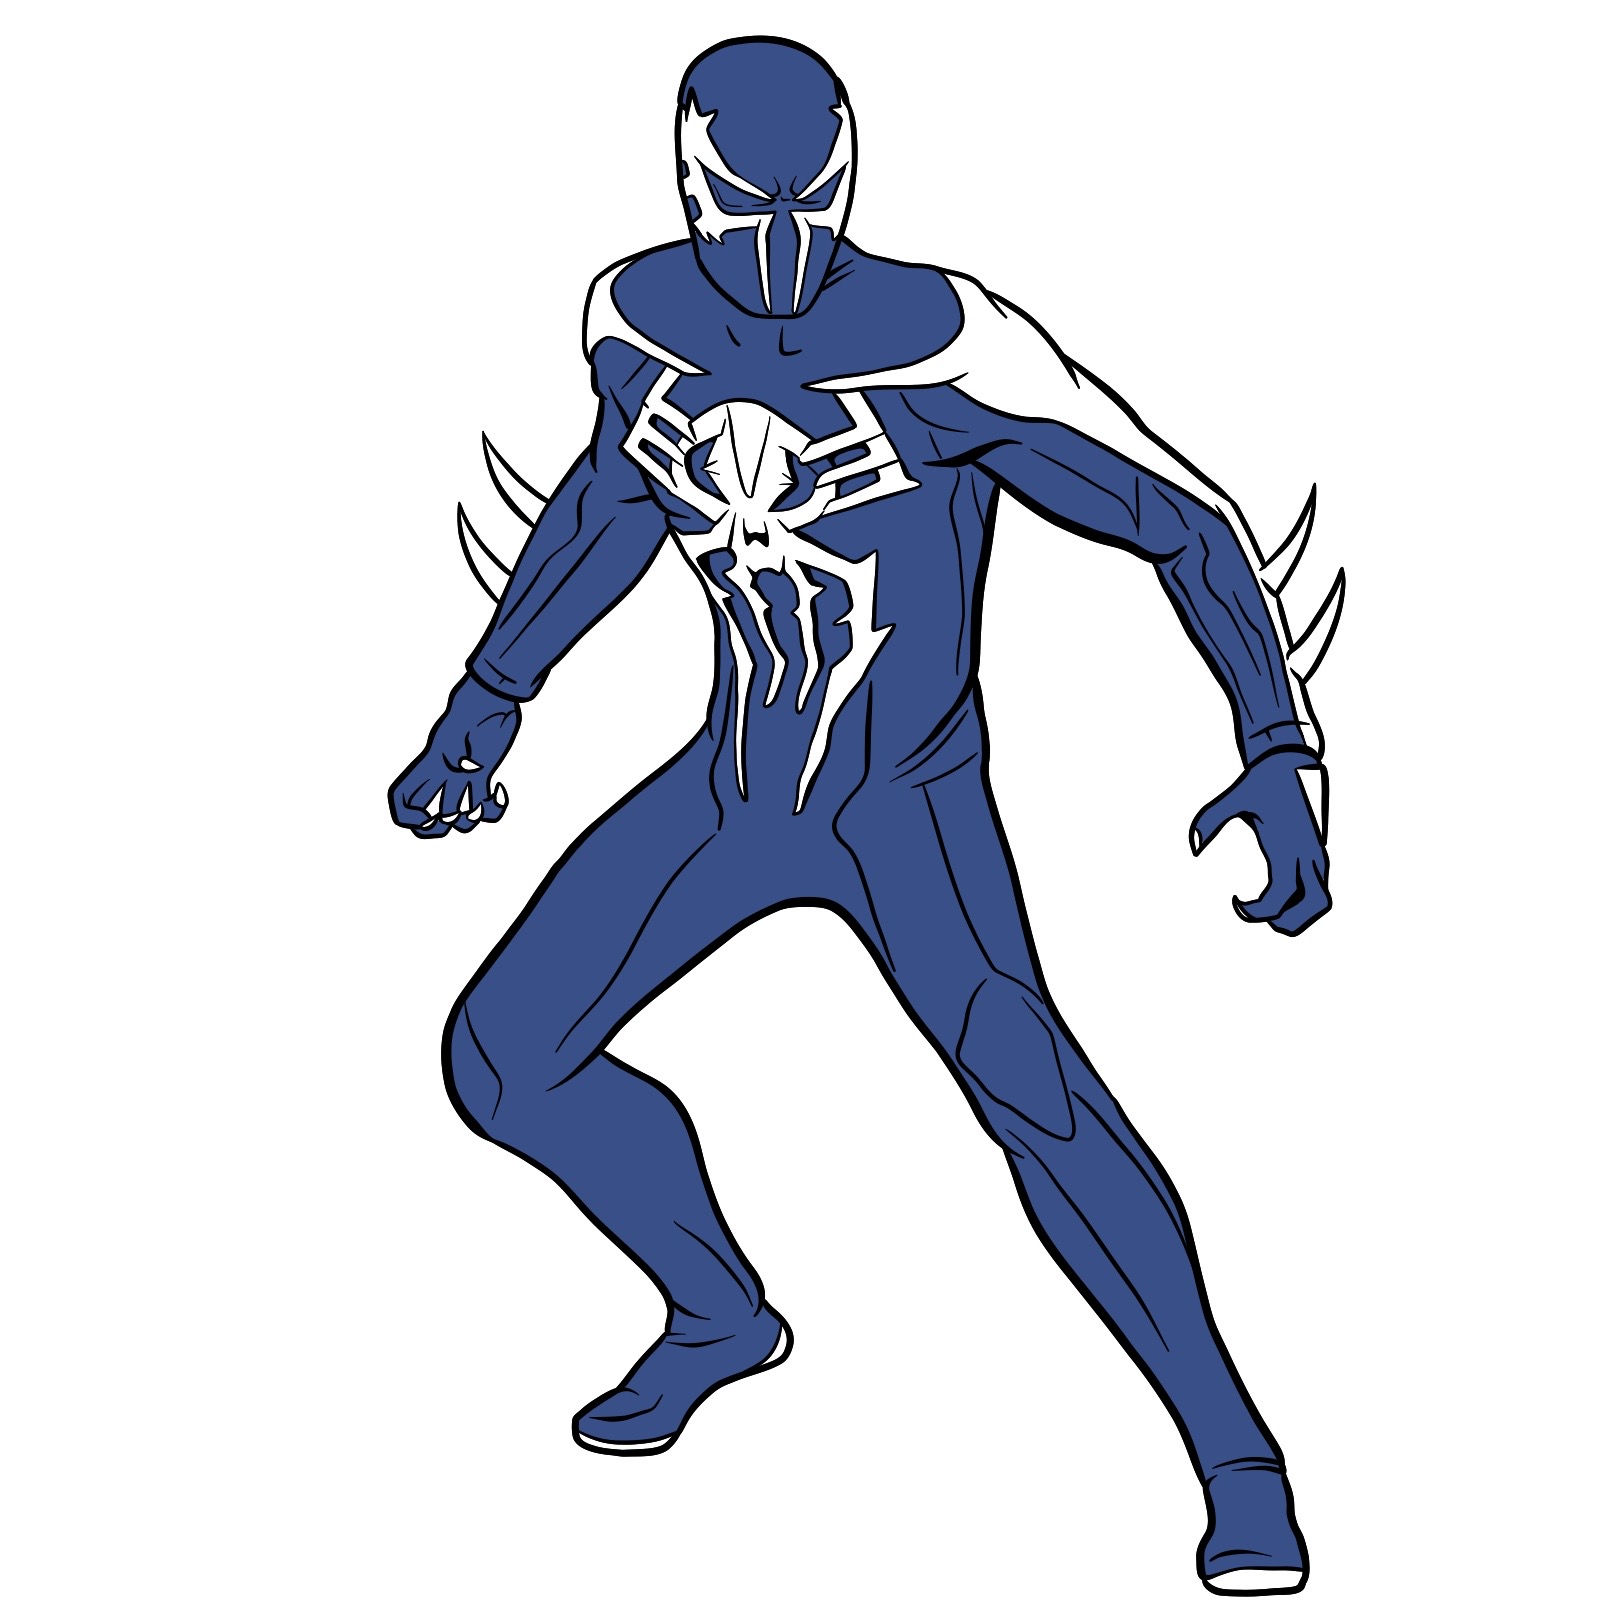 How to draw Spider-Man 2099 - Sketchok easy drawing guides